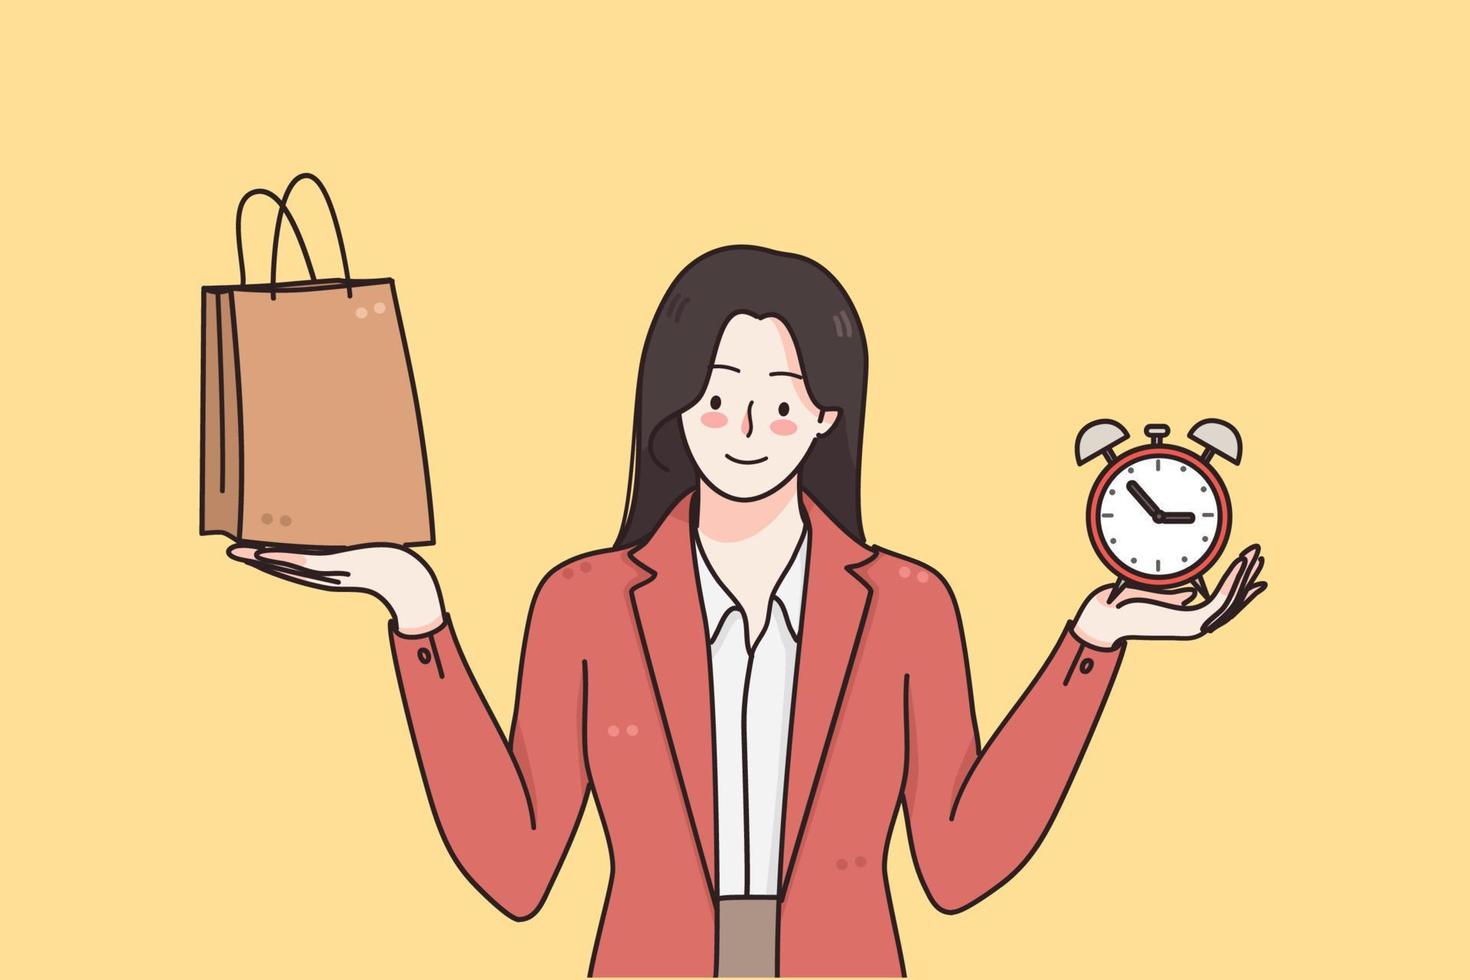 Black Friday, shopping, sales concept. Young positive woman cartoon character in red jacket standing with shopping bag and alarm clock in hands meaning to hurry hands vector illustration